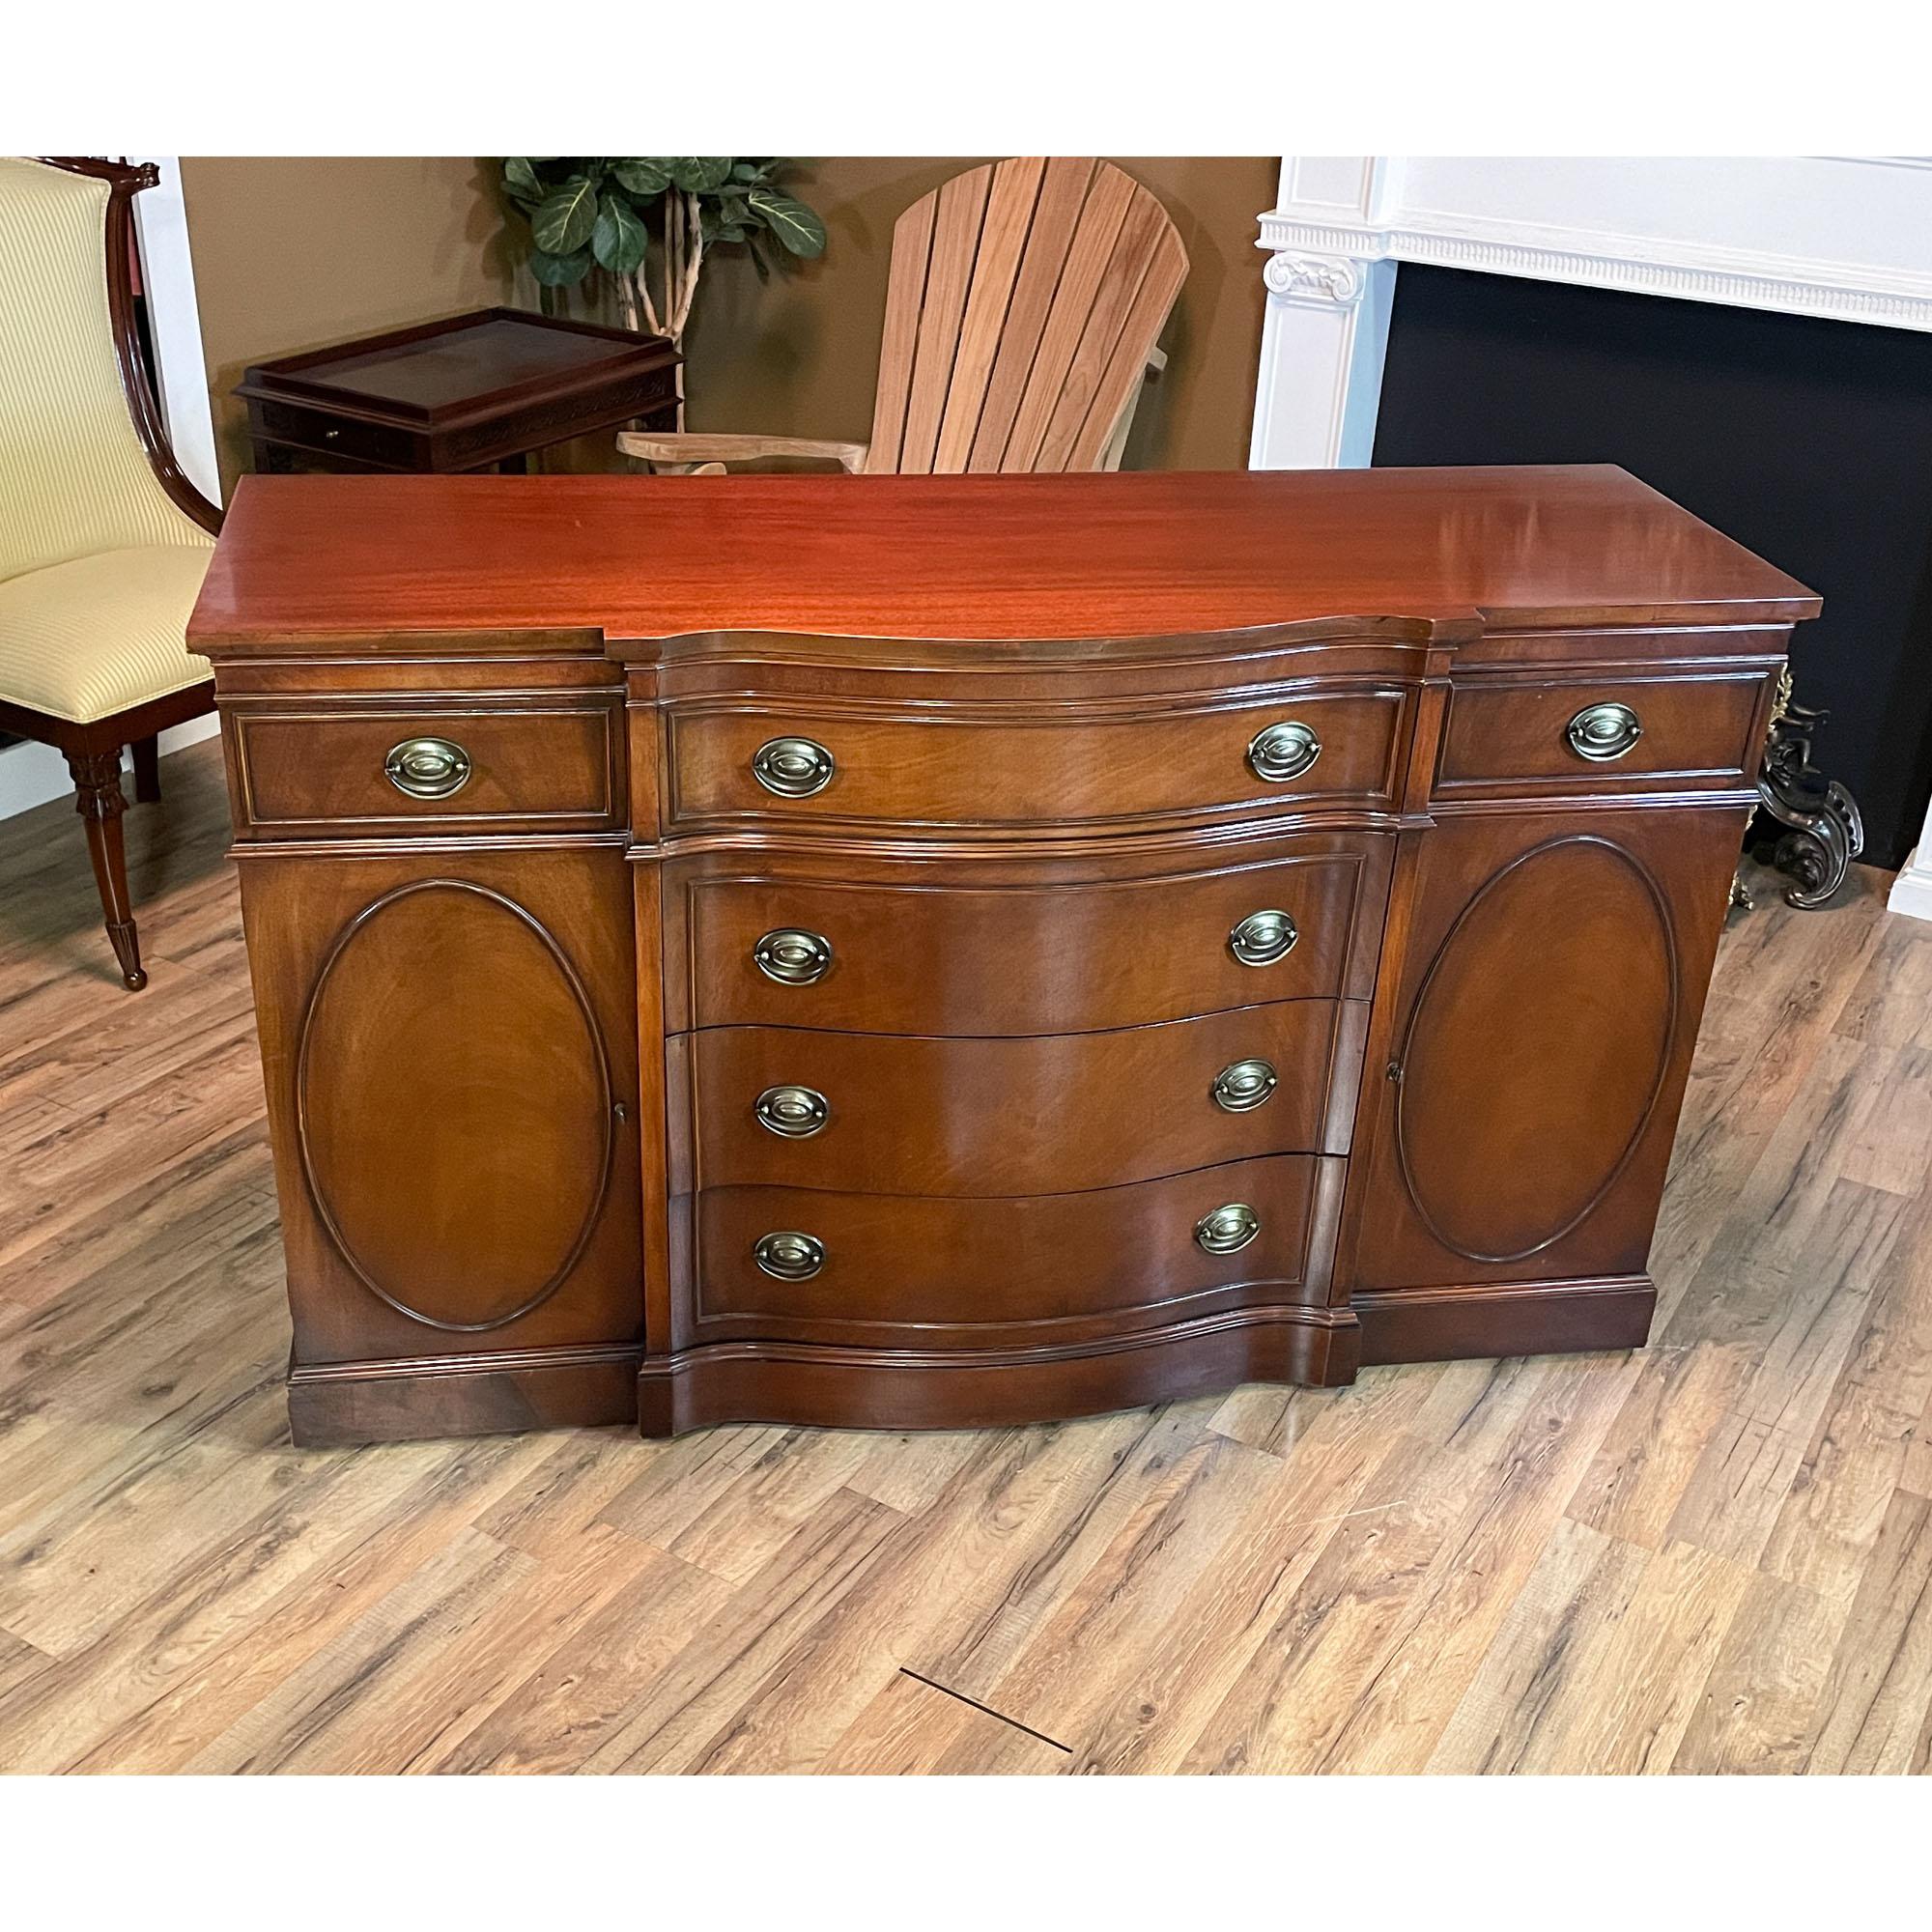 A Vintage Drexel Mahogany Sideboard in great original condition

Simple yet sophisticated this beautiful Vintage Drexel Mahogany Sideboard has everything going for it. This item boasts a nice amount of storage space featuring four drawers down the